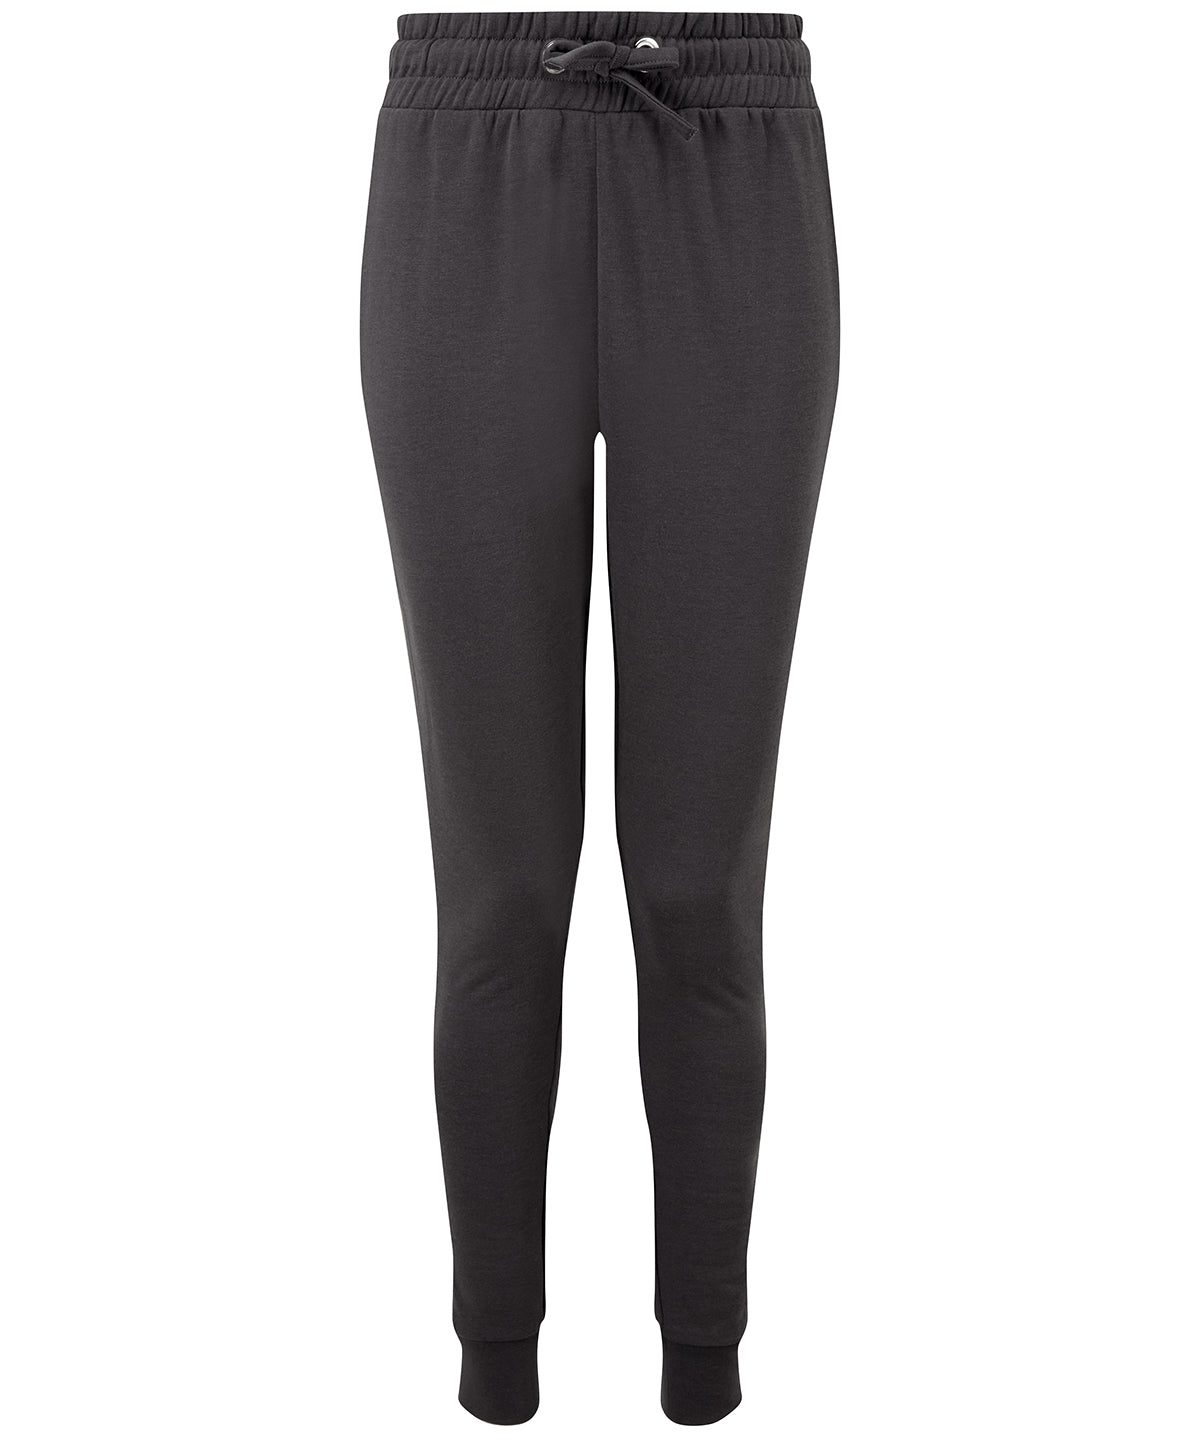 Charcoal - Women's TriDri® fitted joggers Sweatpants TriDri® Activewear & Performance, Co-ords, Exclusives, Home Comforts, Joggers, Leggings, Lounge Sets, Must Haves, On-Trend Activewear, Outdoor Sports, Rebrandable, Sports & Leisure, Tracksuits, Trending Loungewear Schoolwear Centres